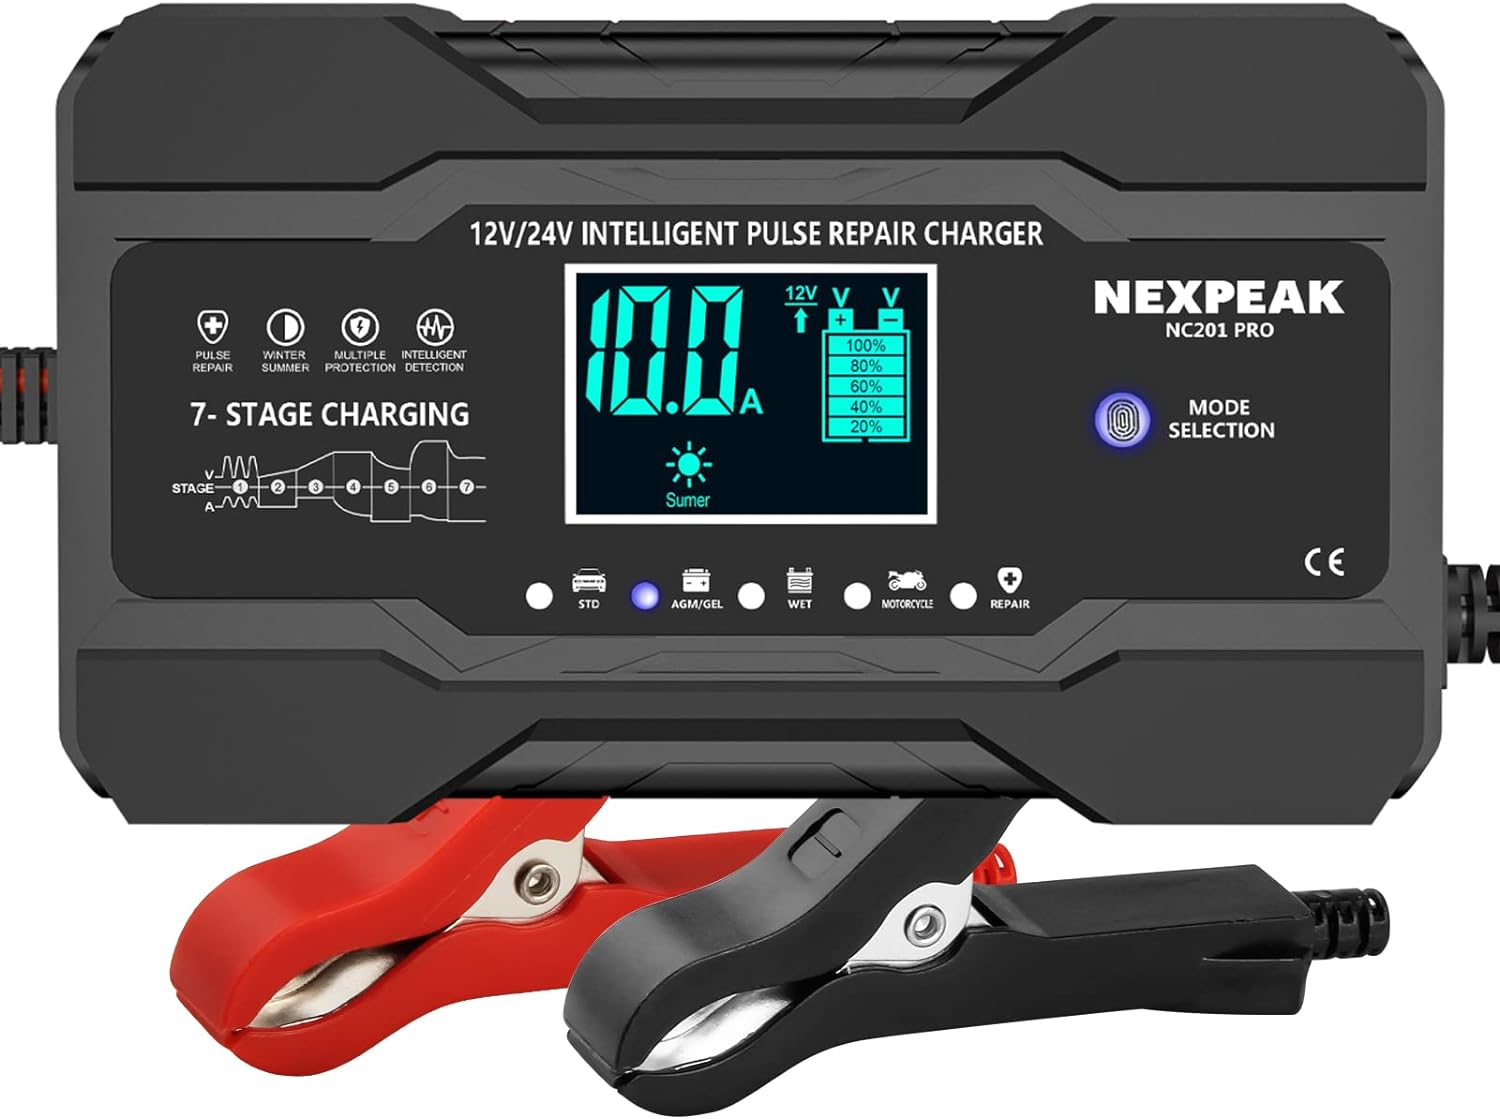 NEXPEAK 10-Amp Car Battery Charger Review